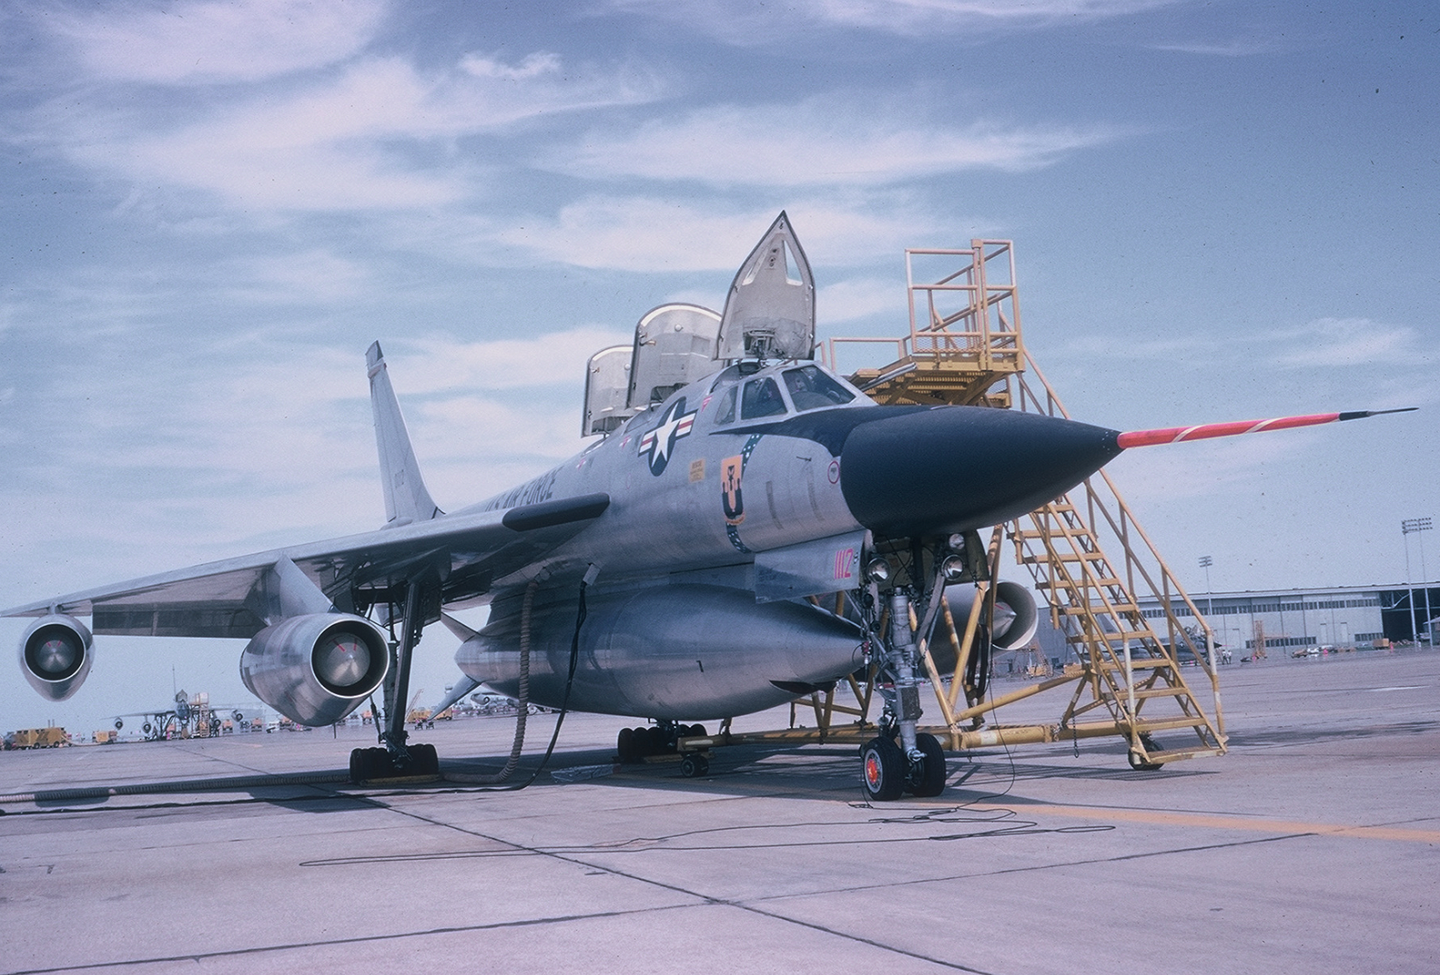 B-58A Hustler 60-1112 with the LA-1 reconnaissance pod installed. The pod contained a KA-56 camera and associated air-conditioning system, plus fuel. <em>U.S. Air Force</em>